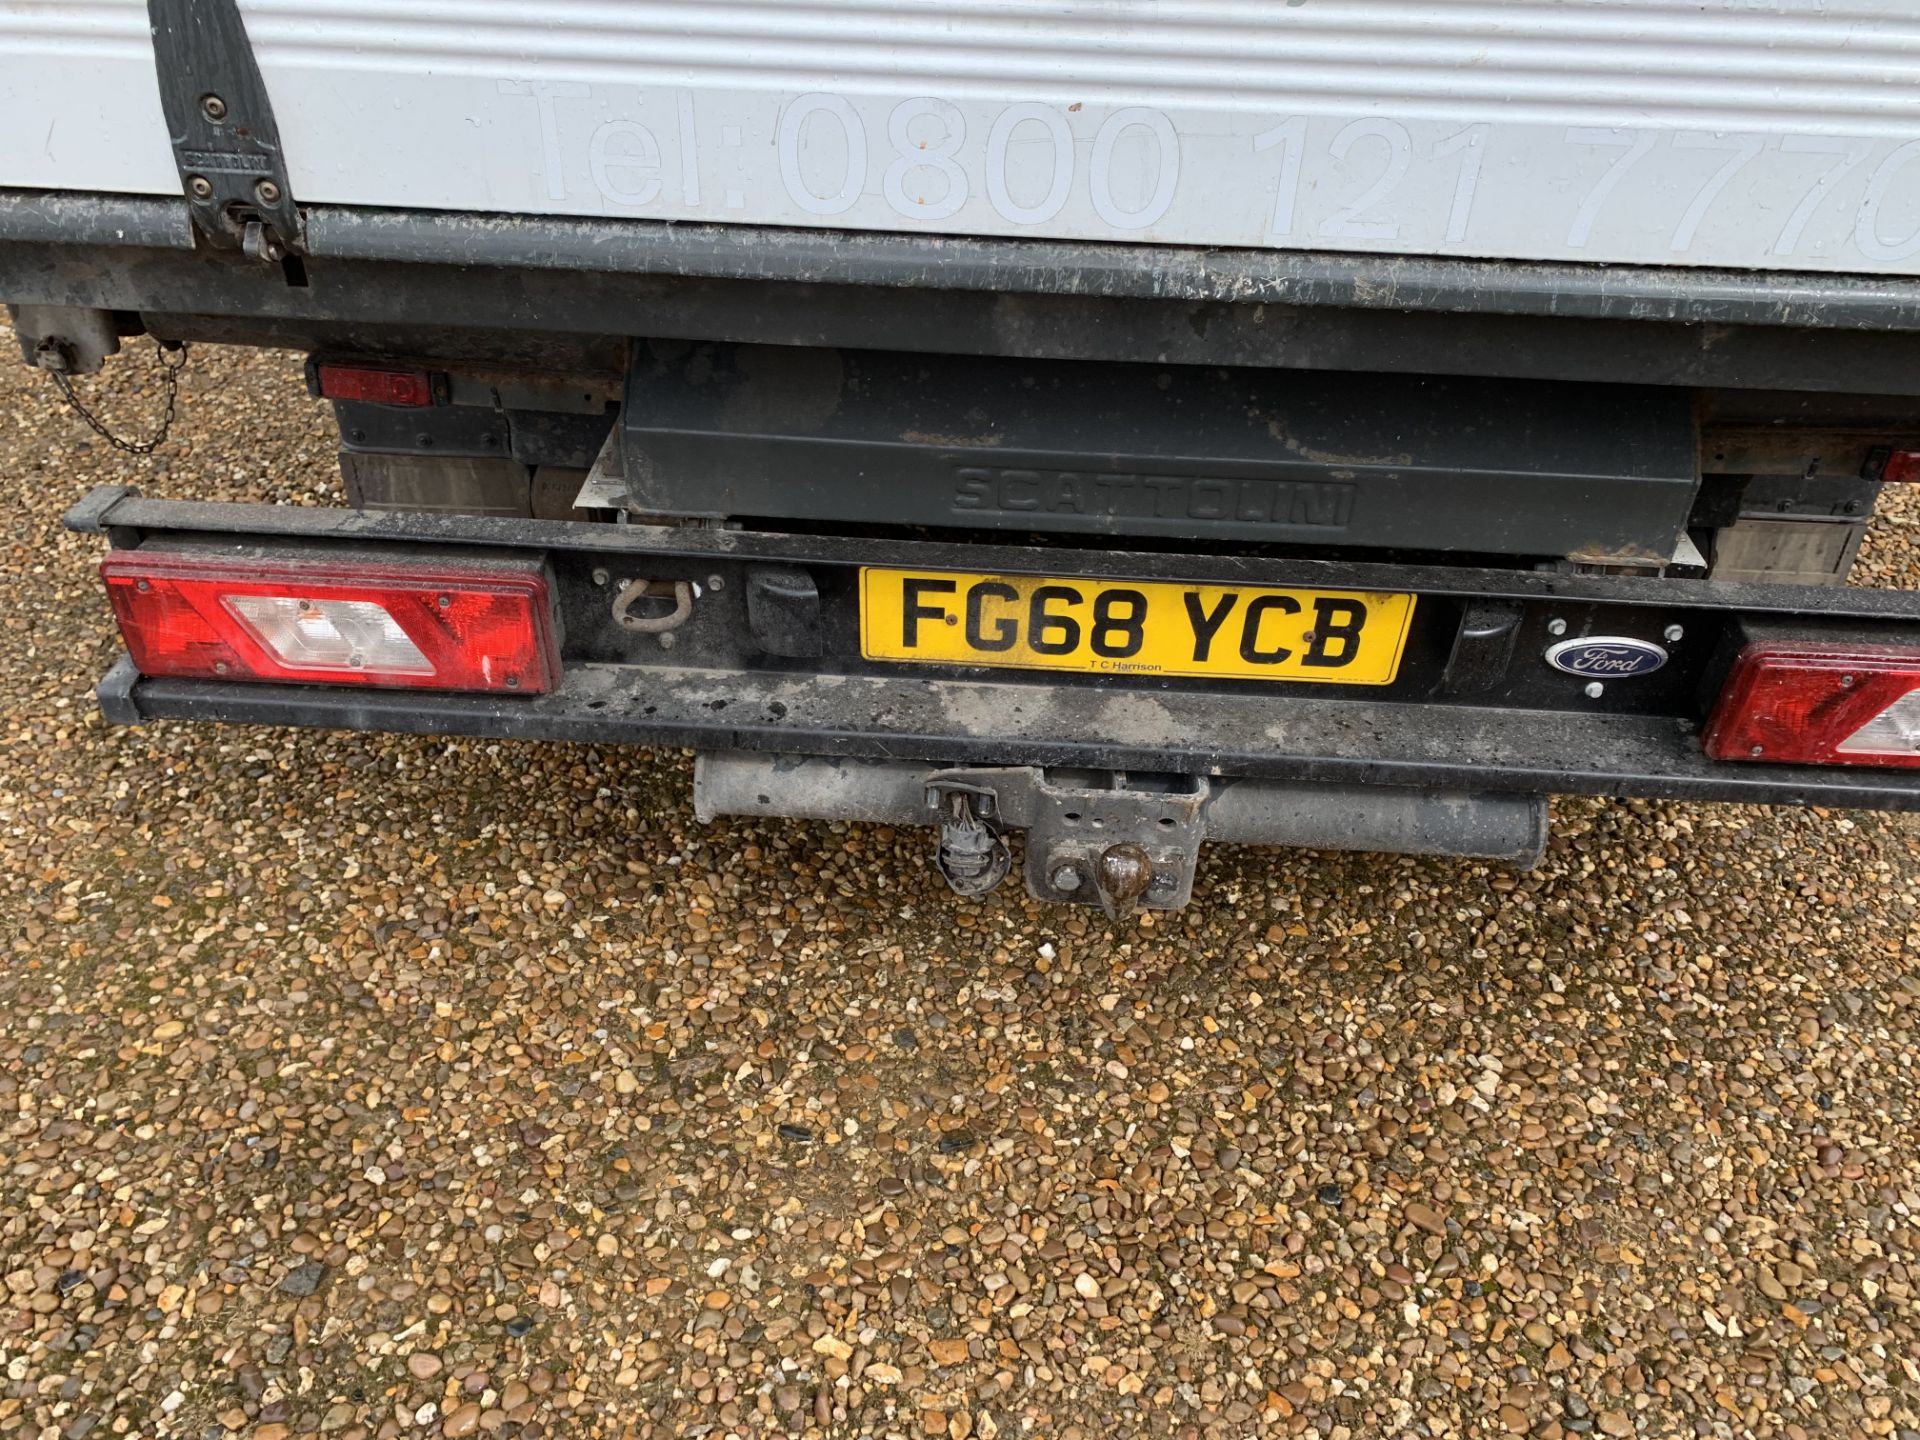 FG68 YCB FORD TRANSIT CREW CAB TIPPER T350 - Image 11 of 29